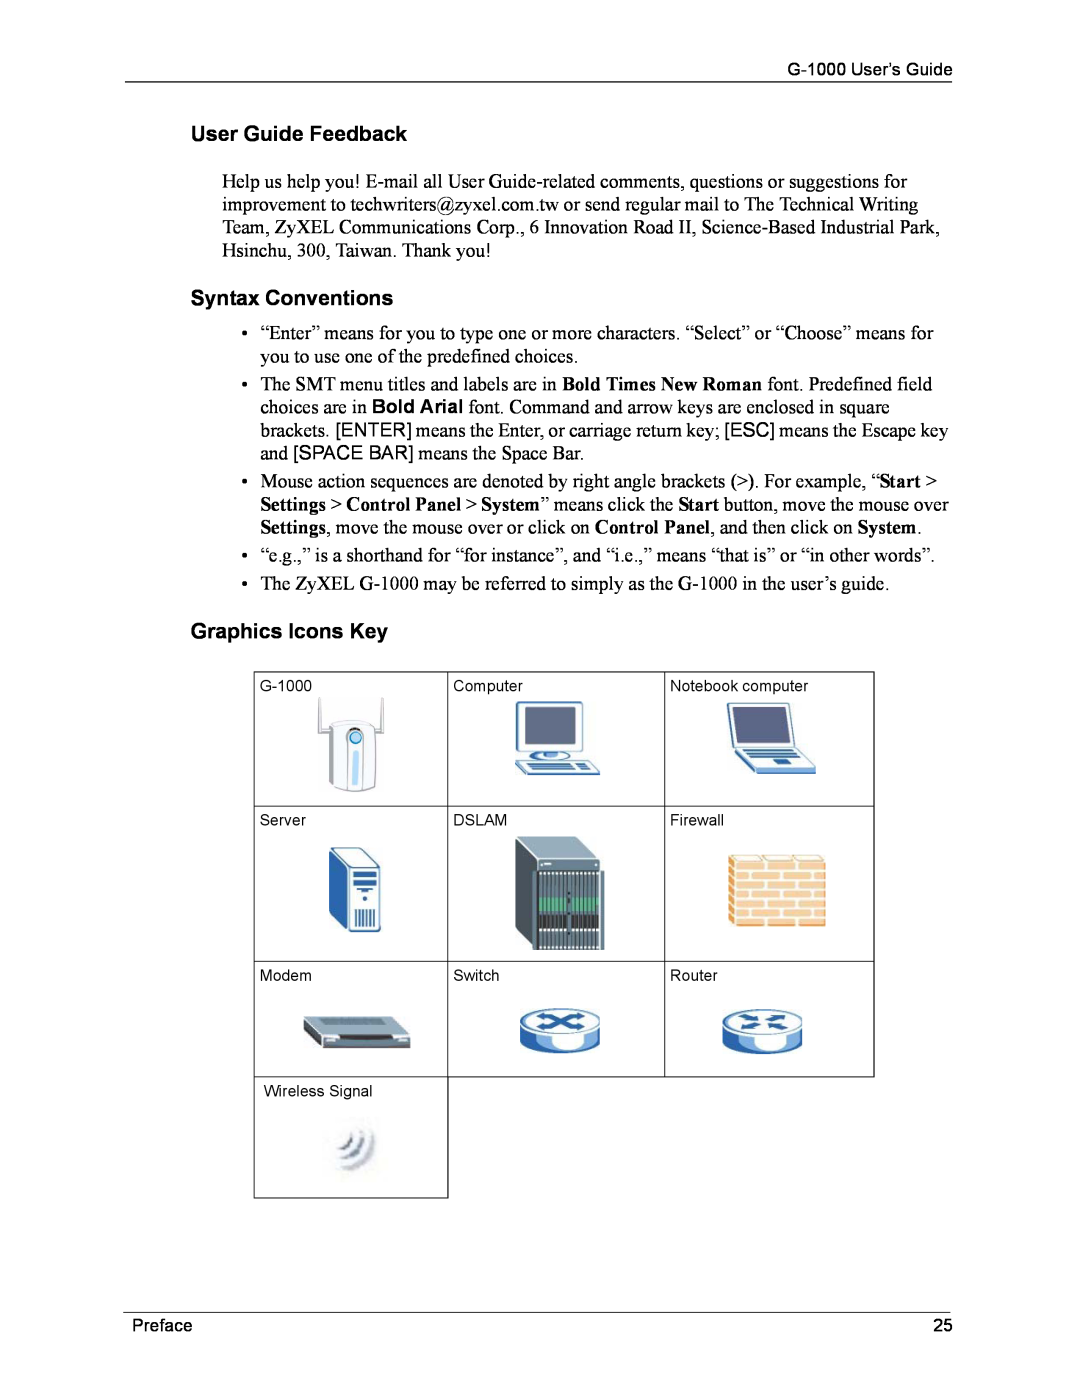 ZyXEL Communications G-1000 manual User Guide Feedback, Syntax Conventions, Graphics Icons Key 